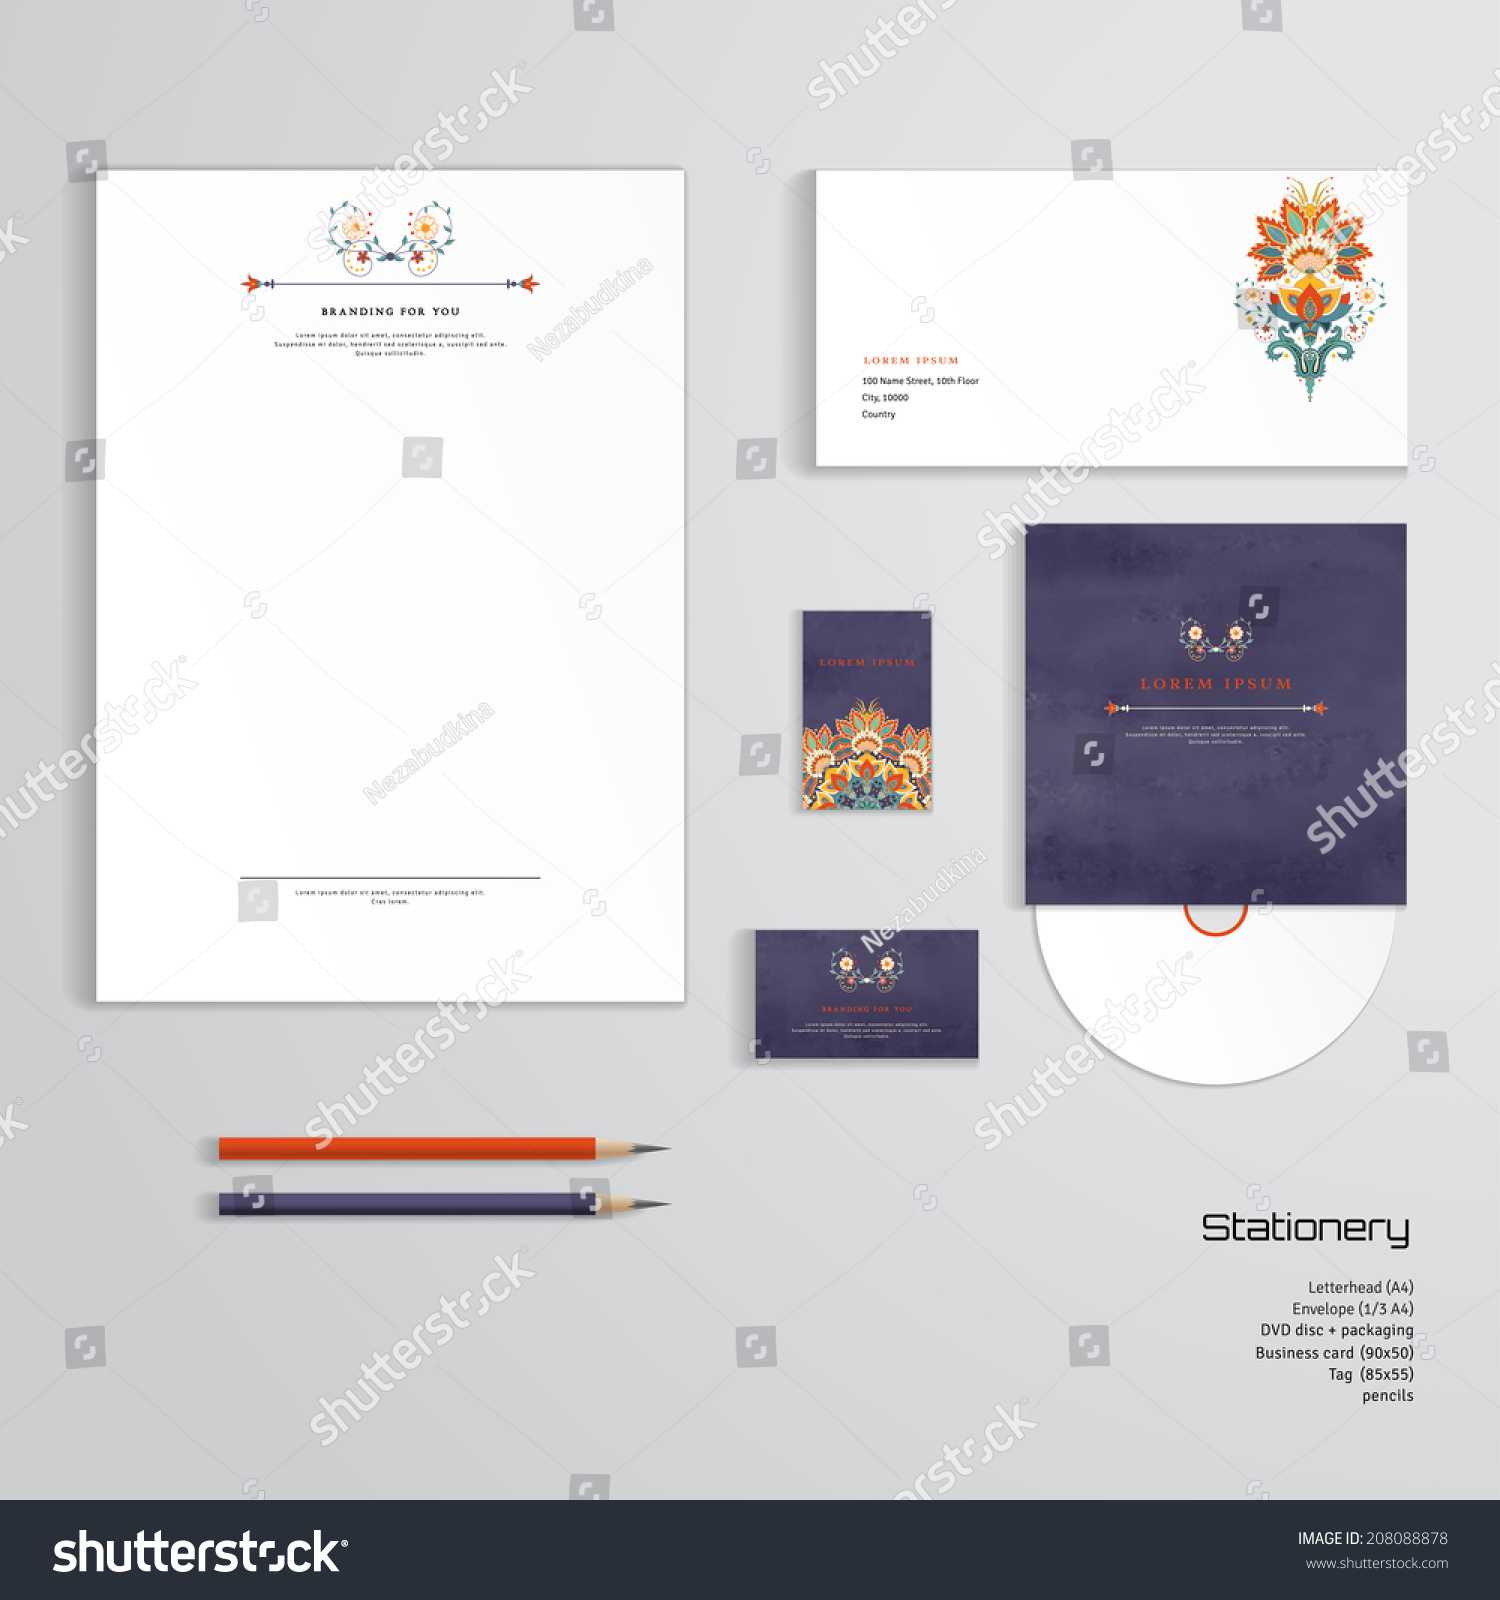 Vector Identity Templates Letterhead Envelope Business Stock Pertaining To Business Card Letterhead Envelope Template